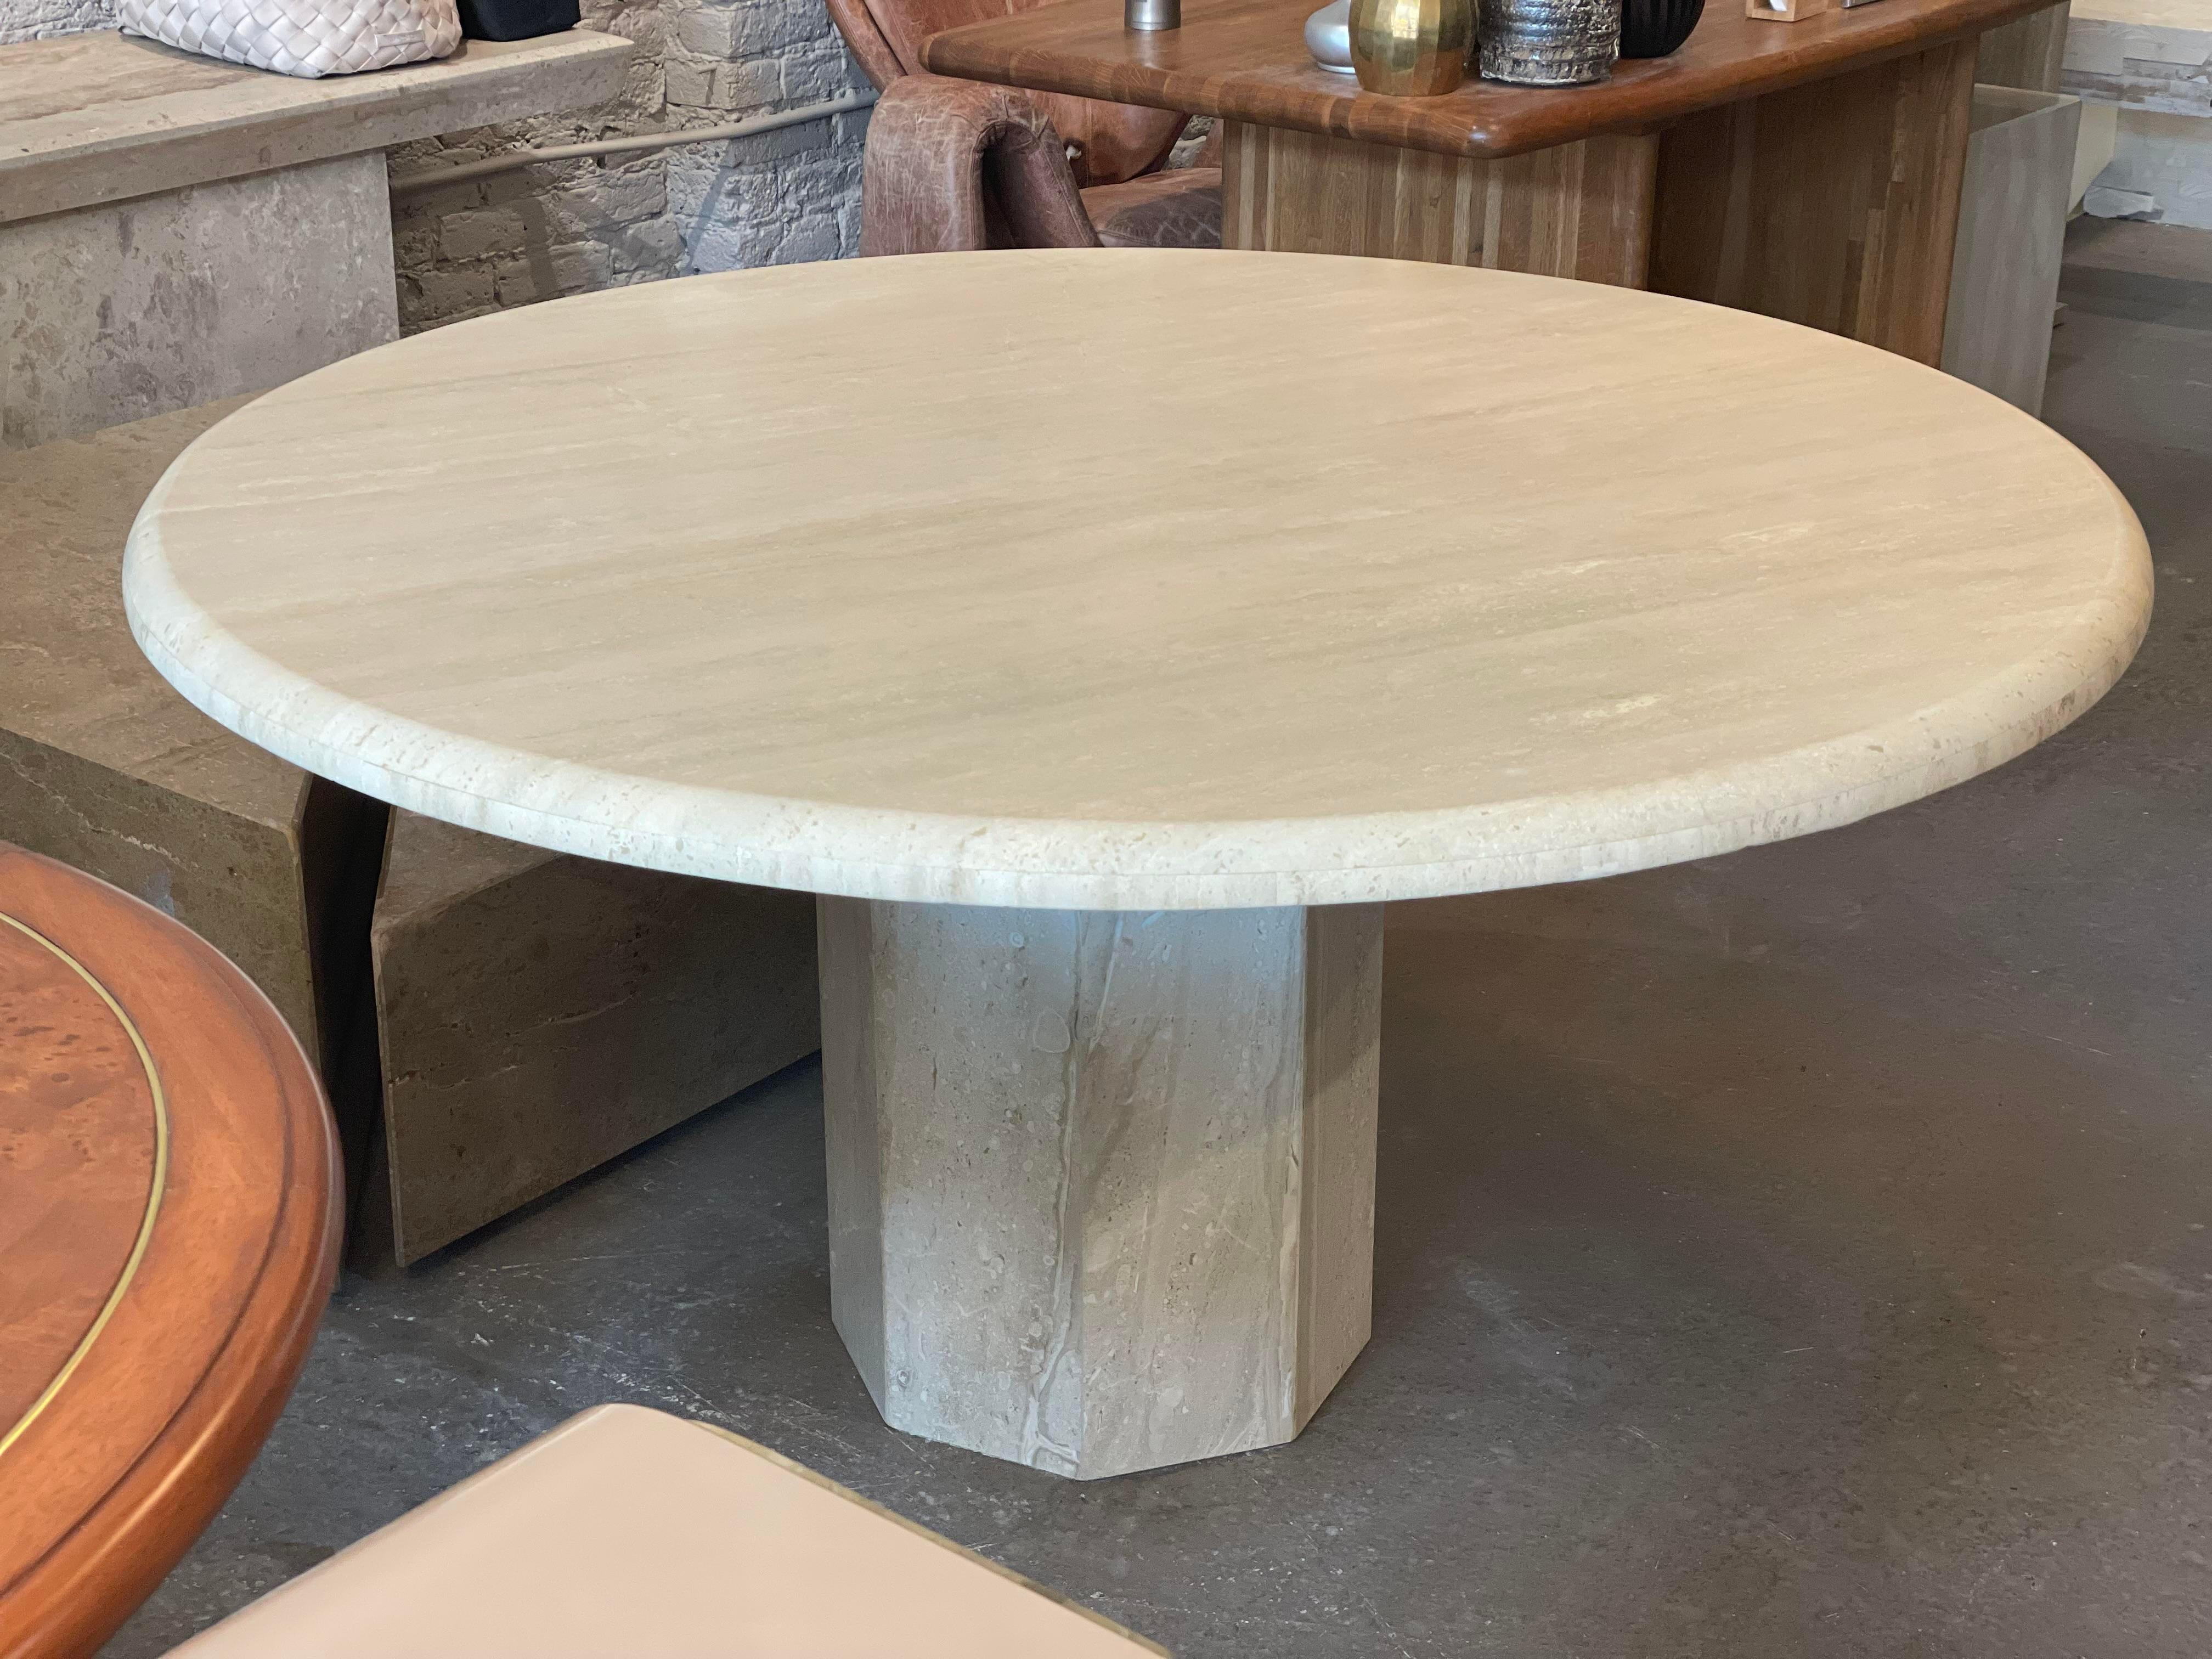 Stunning round dining table from the 70s. Love the bullnose edge and size. 54” easily sits 6.
The table was previously lacquered which was professionally removed. The top and base are now honed, creating a muted natural look.
  